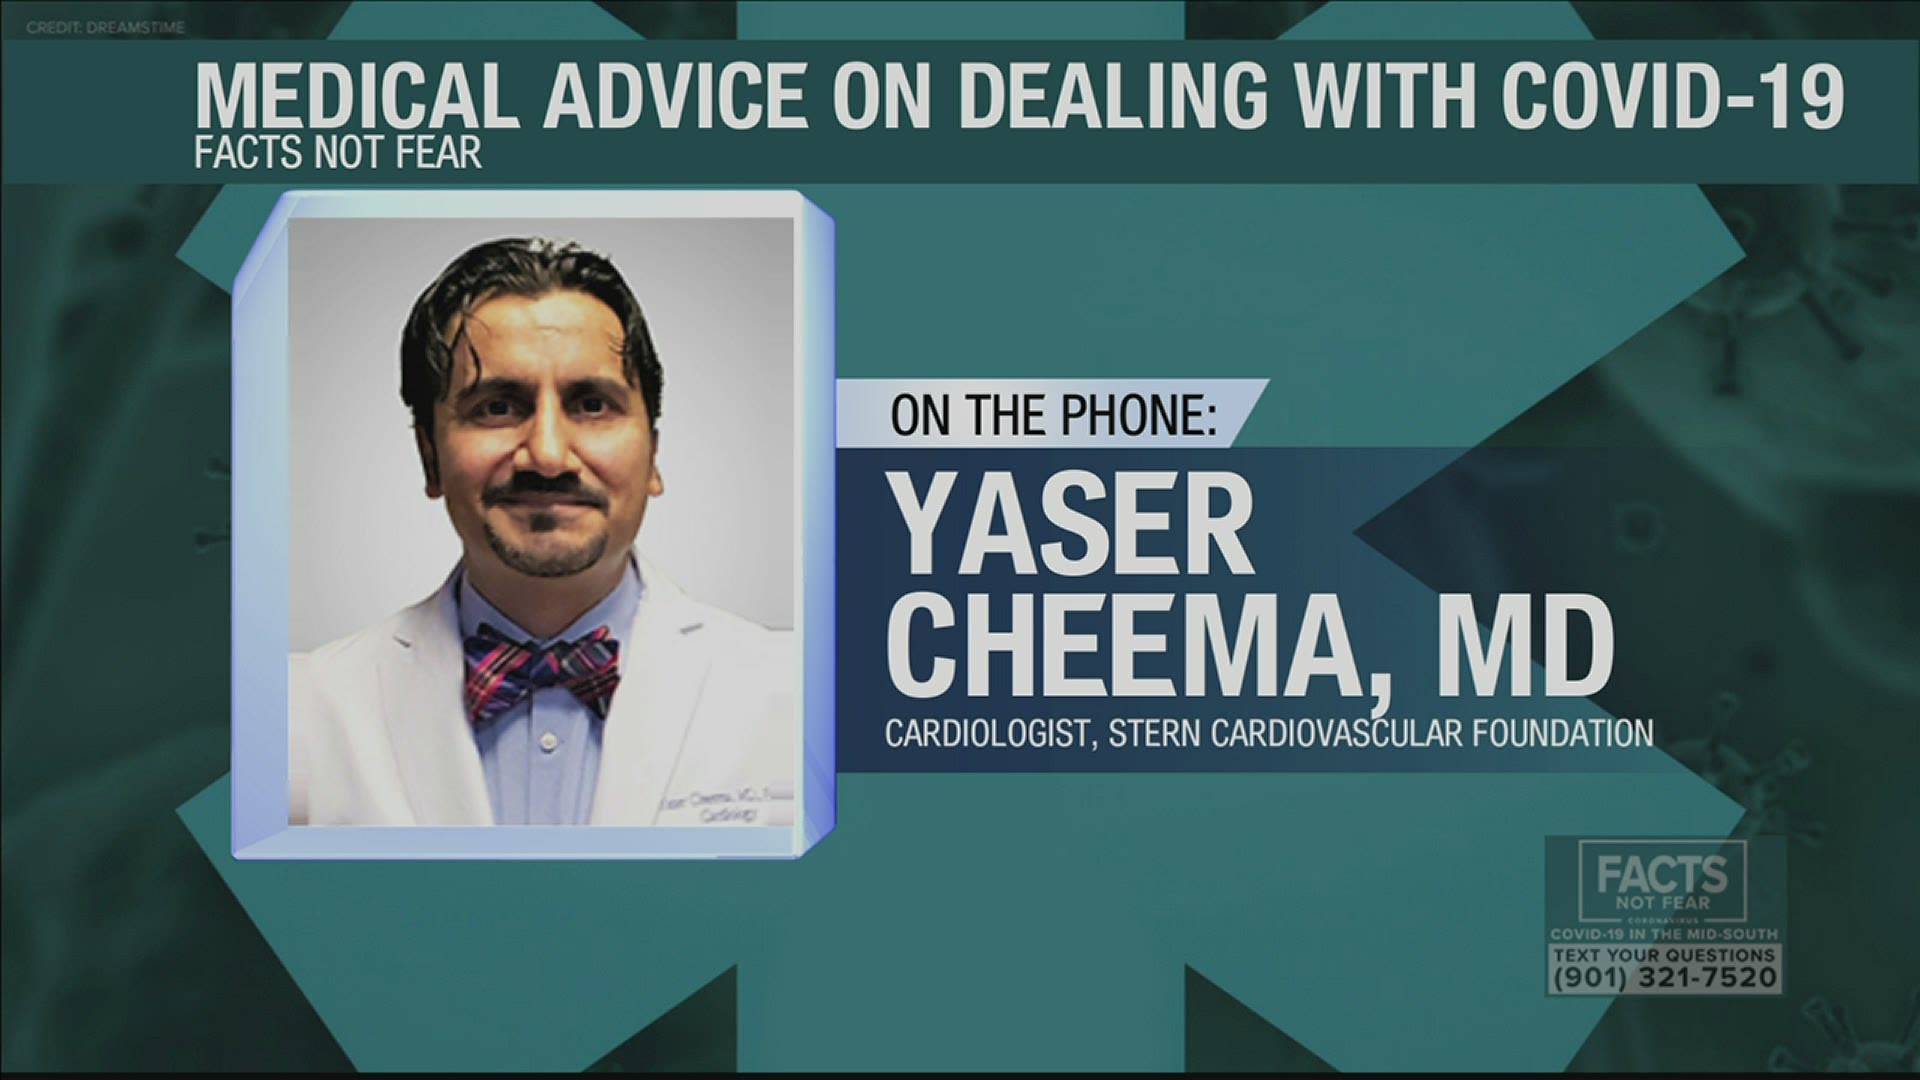 Dr. Yaser Cheema, Medical Advice on Dealing with COVID-19 | Part Two